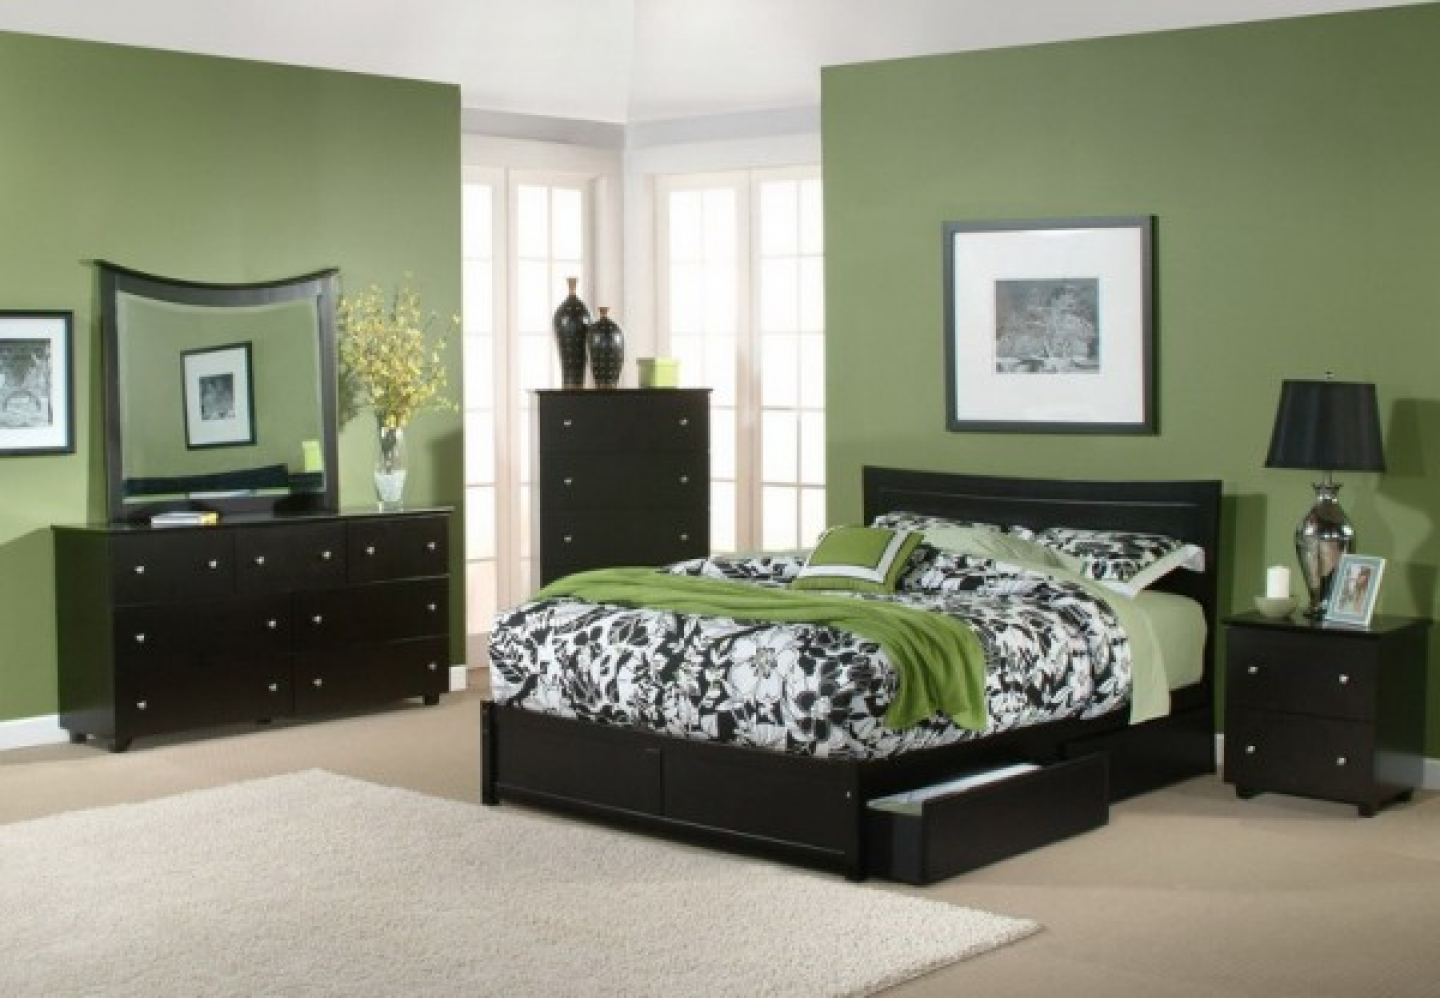 Cozy Paint Color For Bedroom With Dark Furniture Interior Design for dimensions 1440 X 998